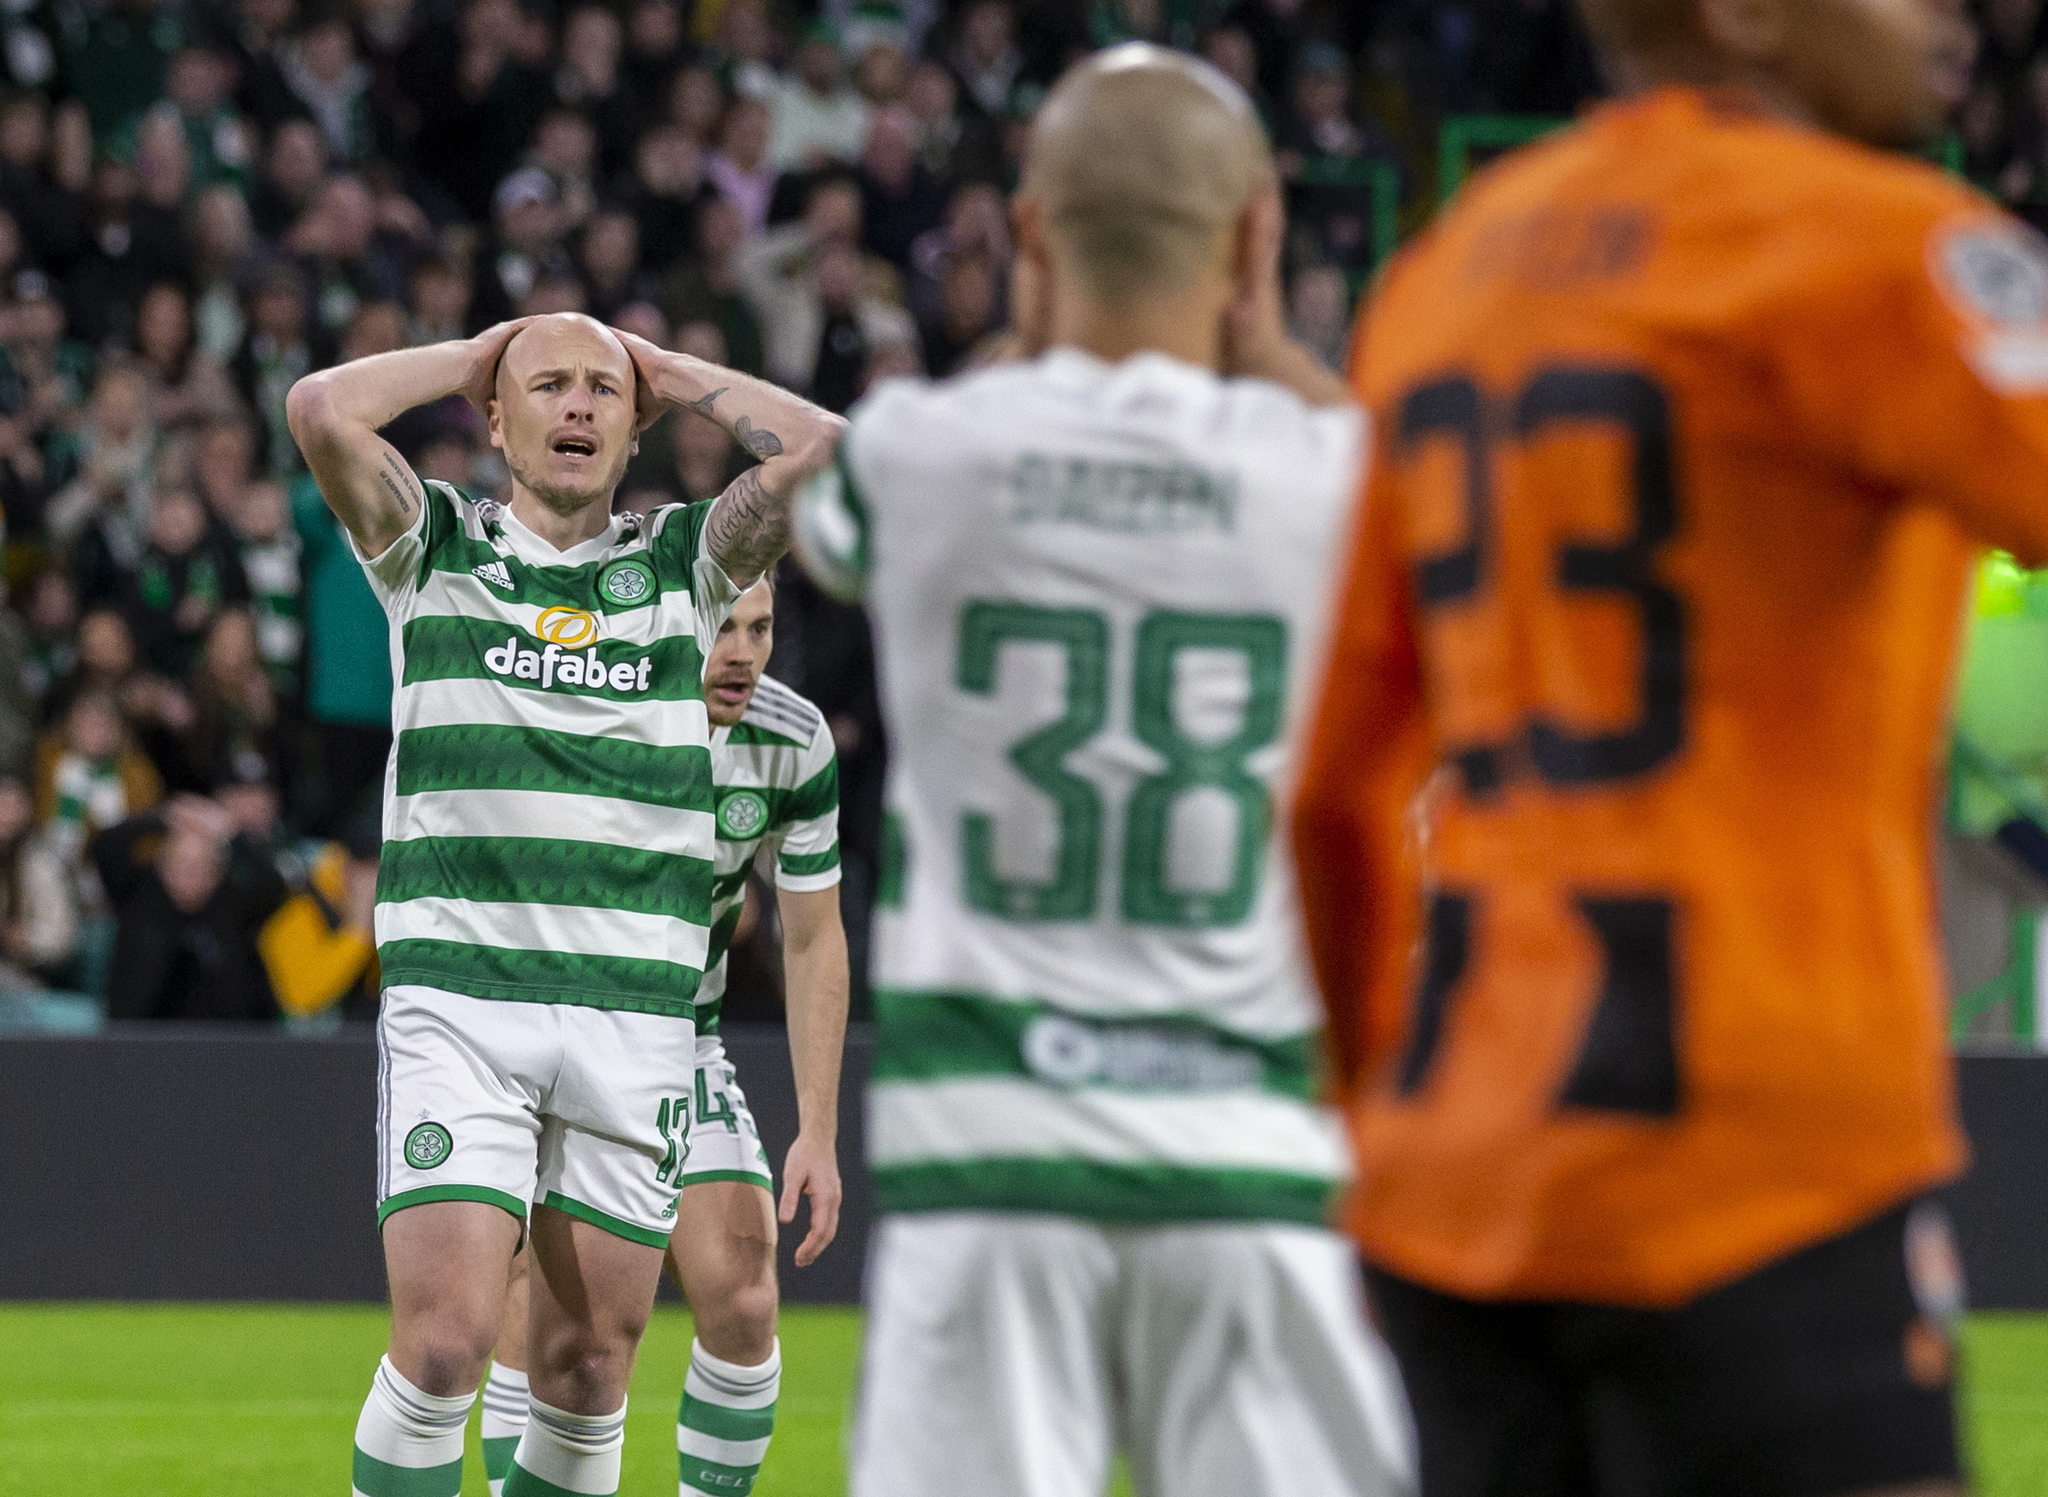 Glasgow (United Kingdom), 25/10/2022.- Celtic's Aaron Mooy reacts during the UEFA Champions League group F soccer match between Celtic Glasgow and lt;HIT gt;Shakhtar lt;/HIT gt; Donetsk in Glasgow, Britain, 25 October 2022. (Liga de Campeones, Reino Unido) EFE/EPA/ROBERT PERRY